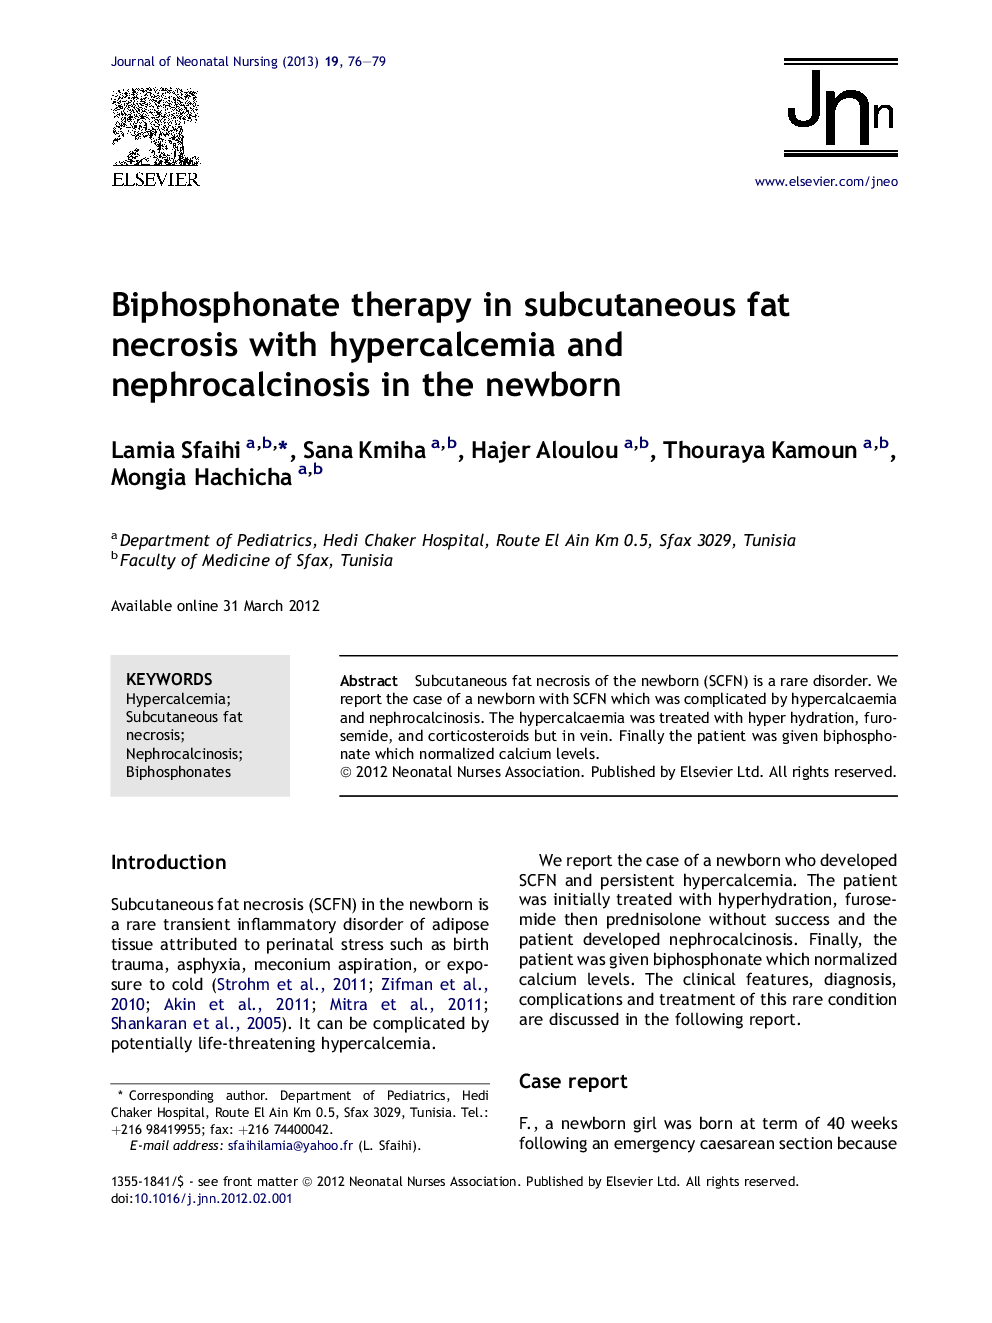 Biphosphonate therapy in subcutaneous fat necrosis with hypercalcemia and nephrocalcinosis in the newborn